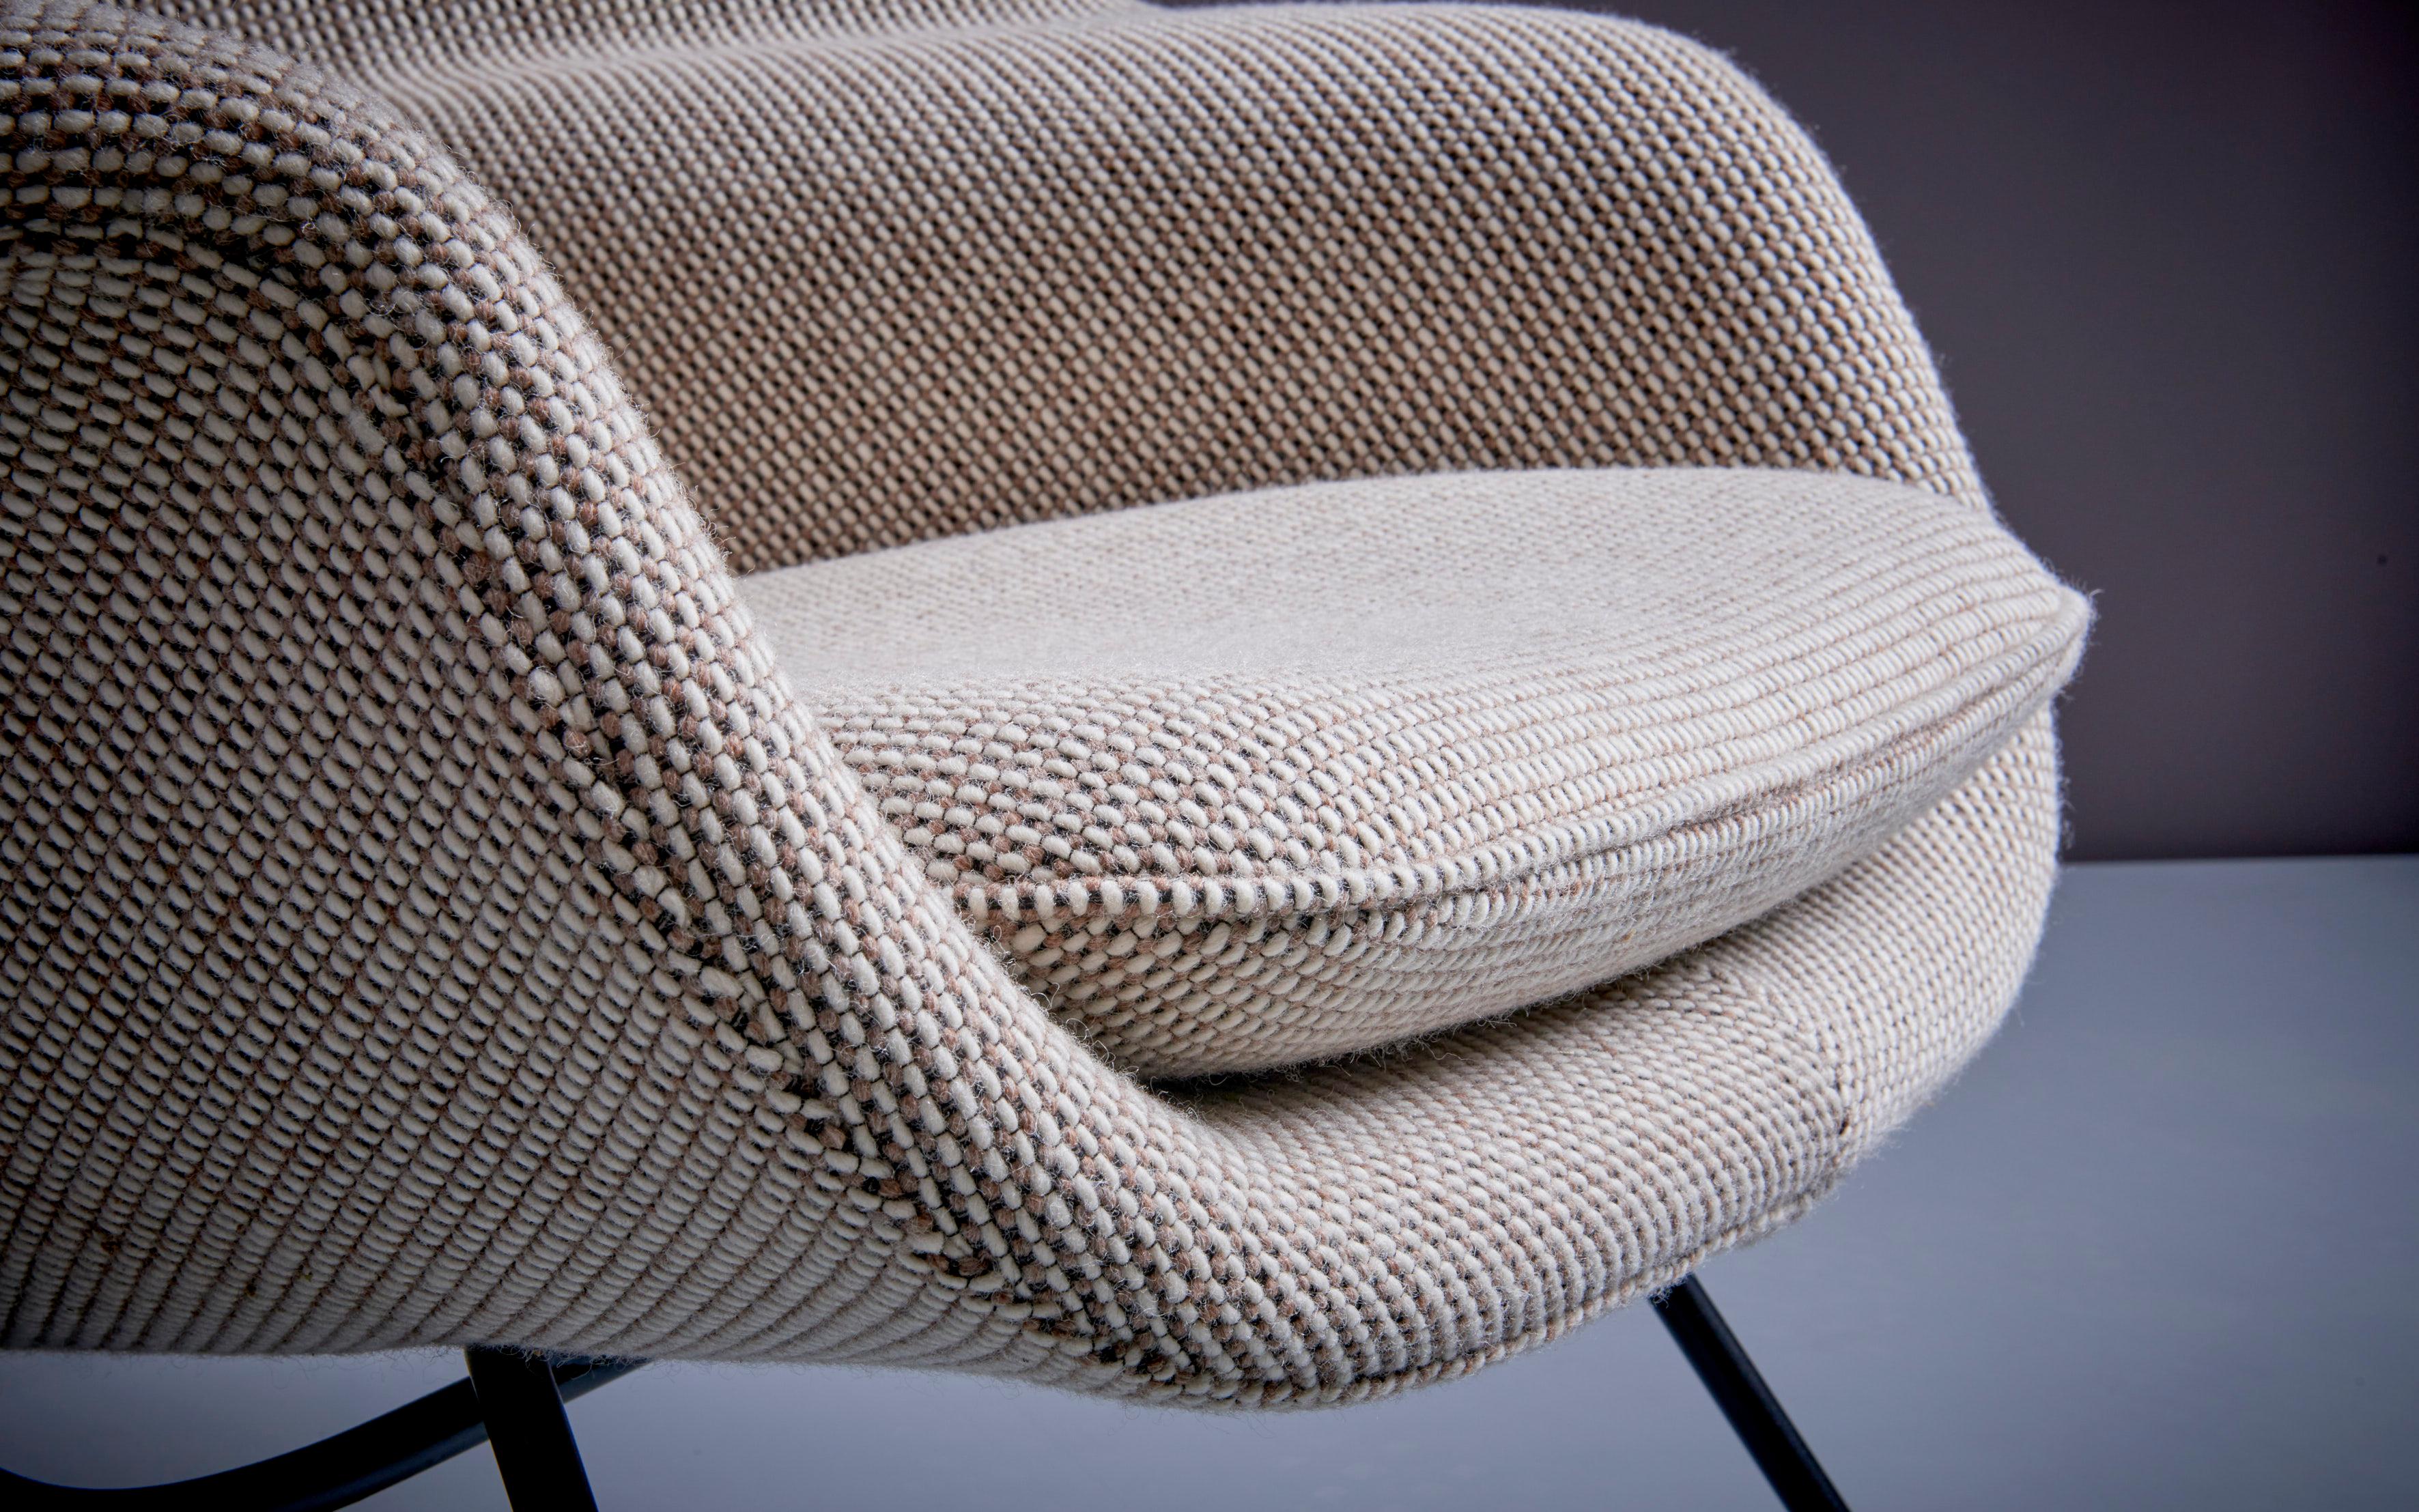 The measurements given apply to the lounge chair. The ottoman measures 52 cm in depth, 70cm in width and 36cm in height. Reupholstered in Cato Fabric by Knoll Textiles. 

The Knoll Womb Chair is a modern Classic of furniture design, created by